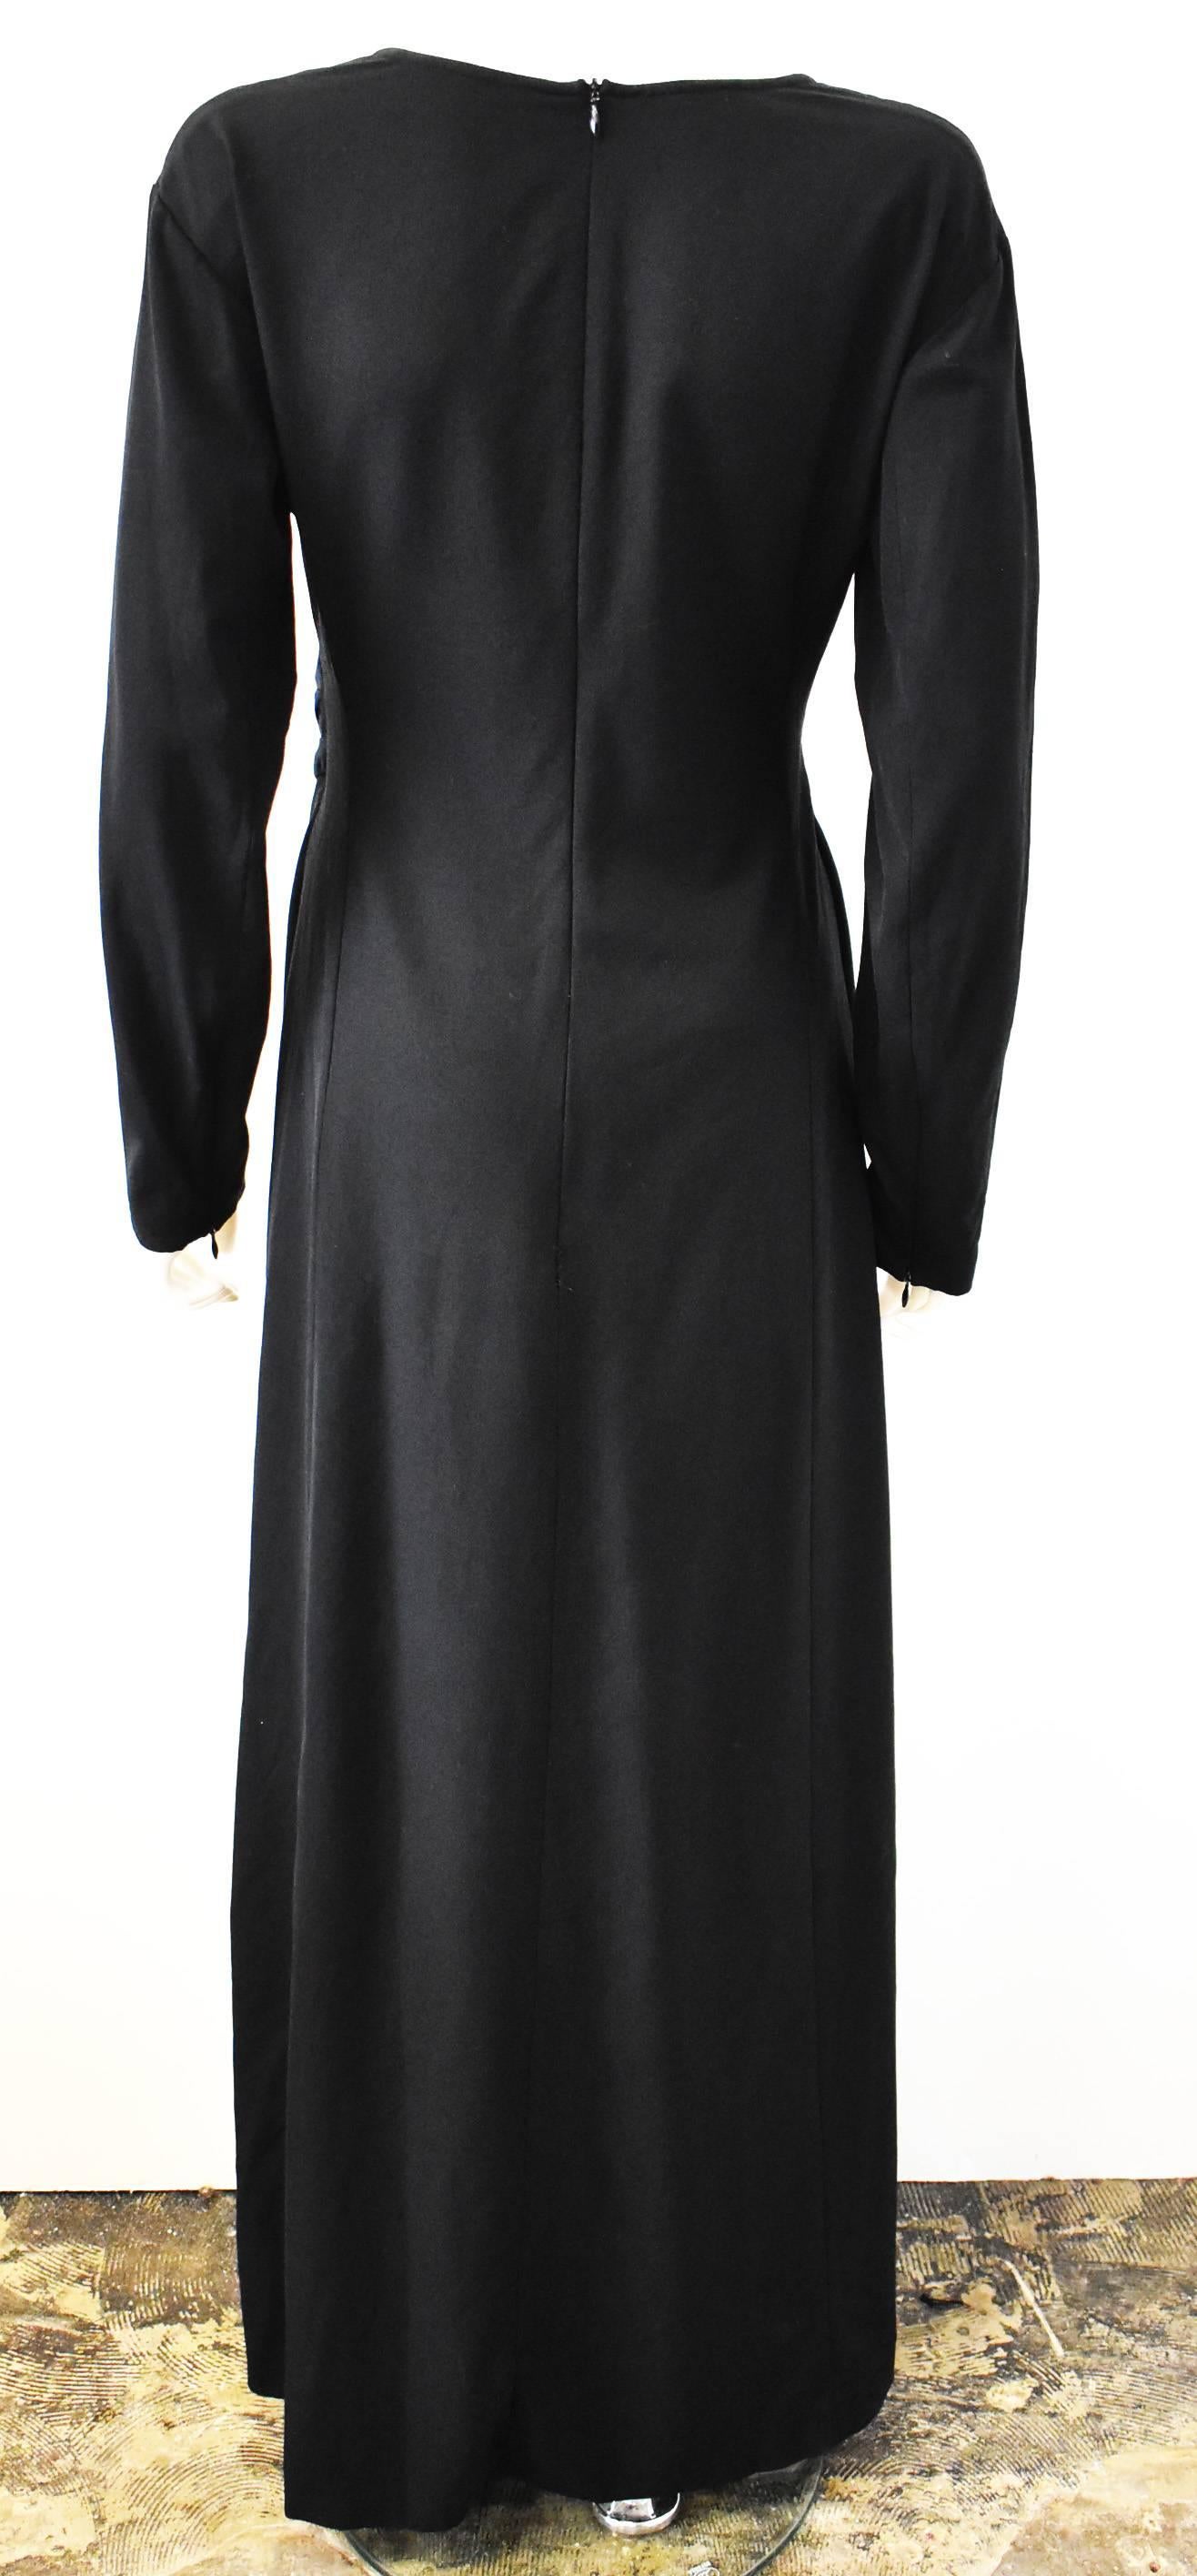 Dries Van Noten Black Long Dress With Open Drape Waist In Good Condition For Sale In London, GB